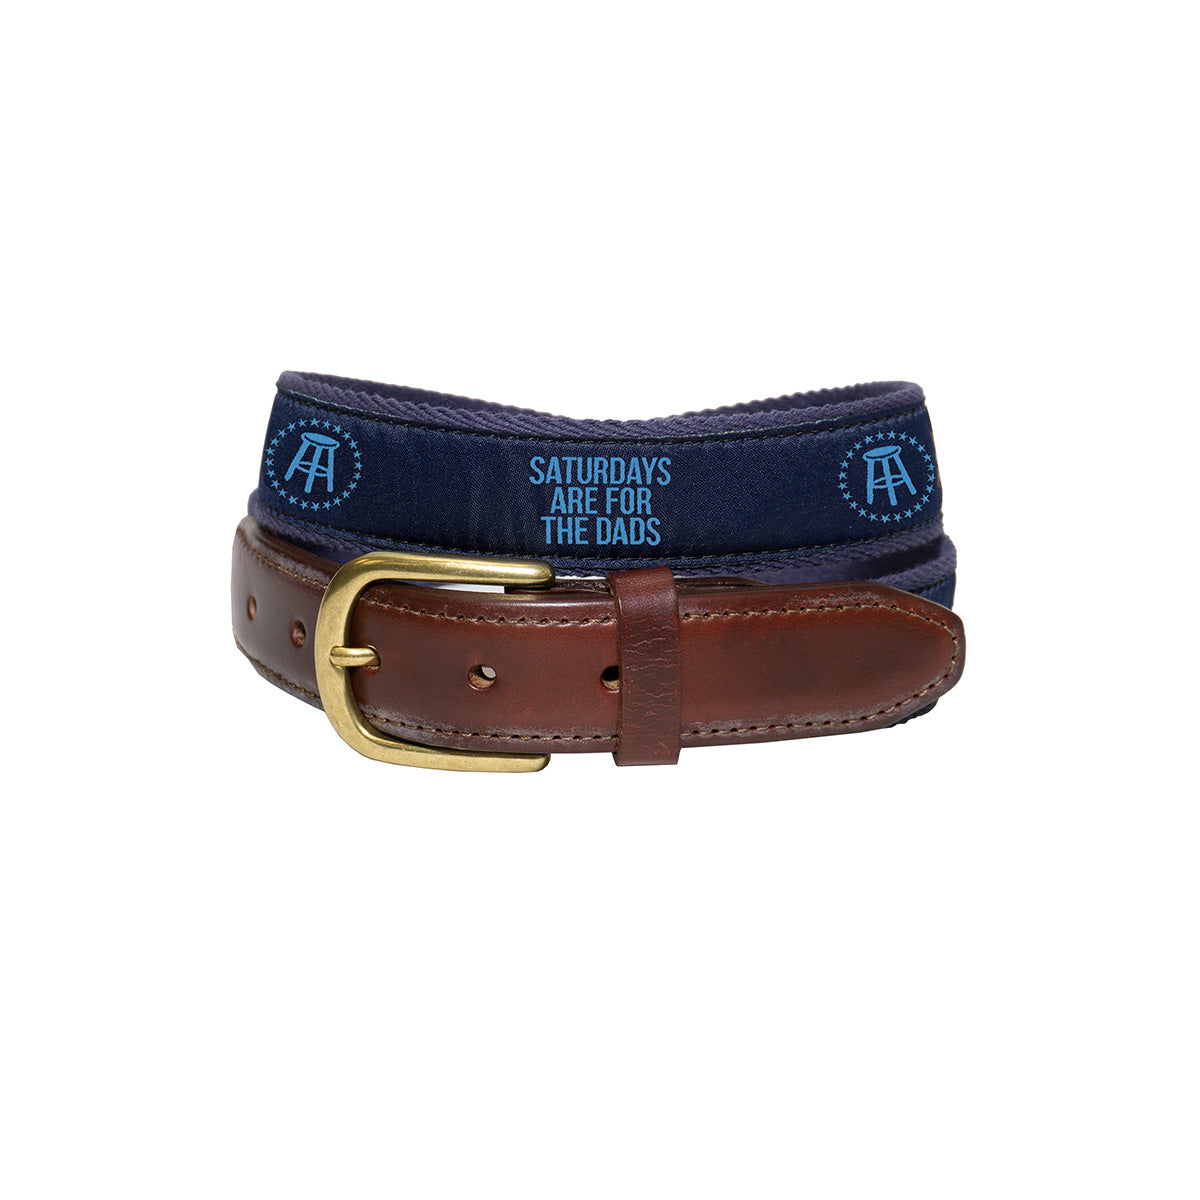 Saturdays Are For The Dads Leather Ribbon Belt-Belts-SAFTB-Barstool Sports